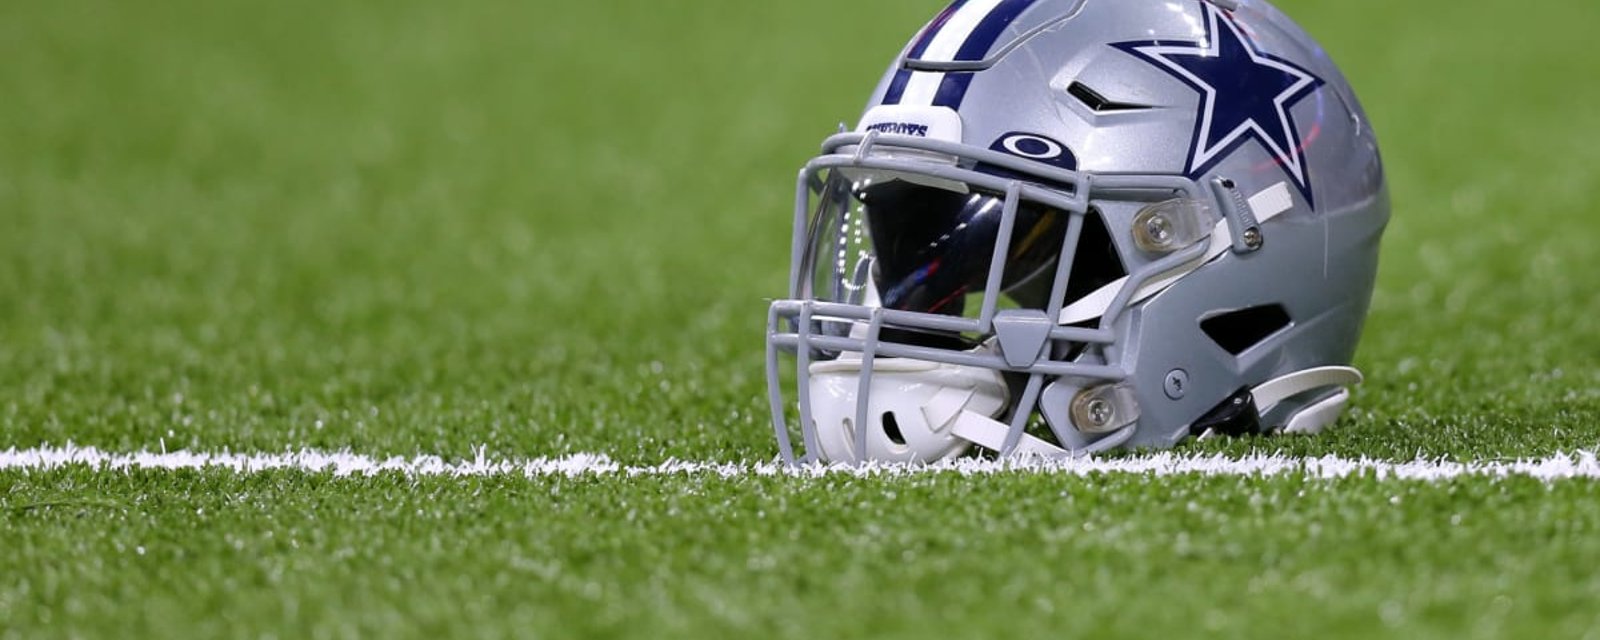 Cowboys release statement after tragic passing